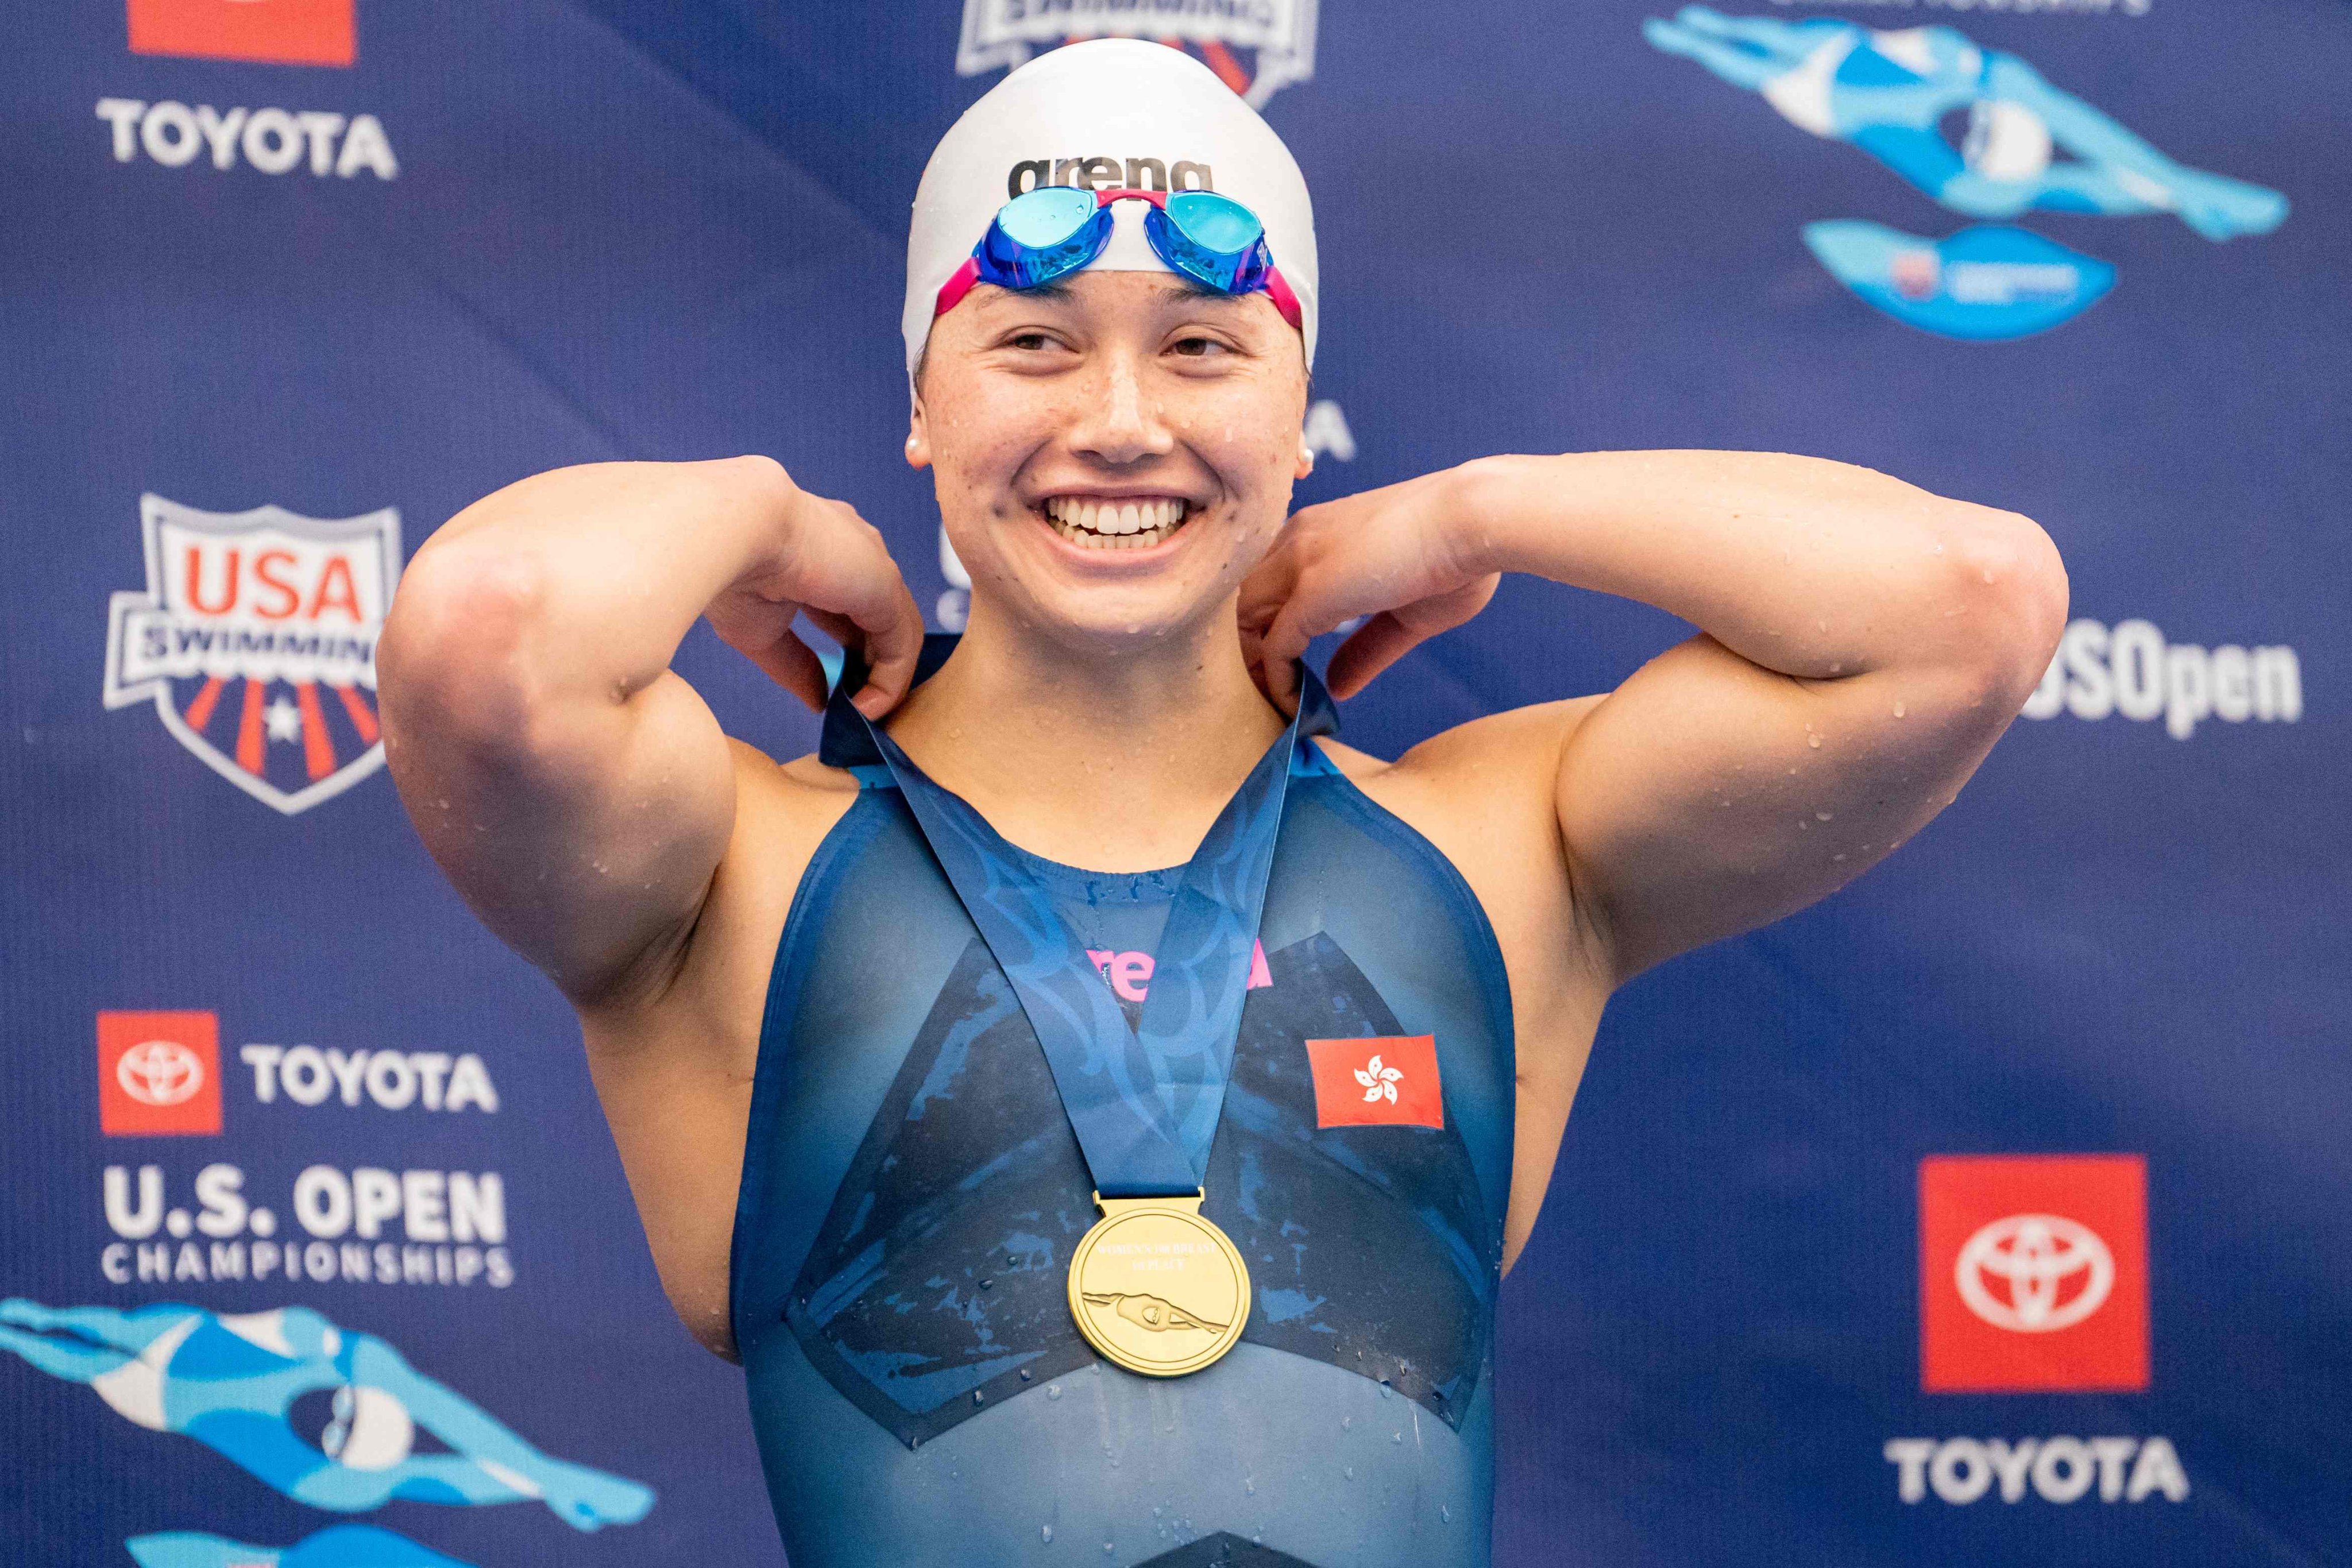 Siobhan Haughey smiles after winning the women’s 100m breaststroke at the Toyota US Open. Photo: Getty Images